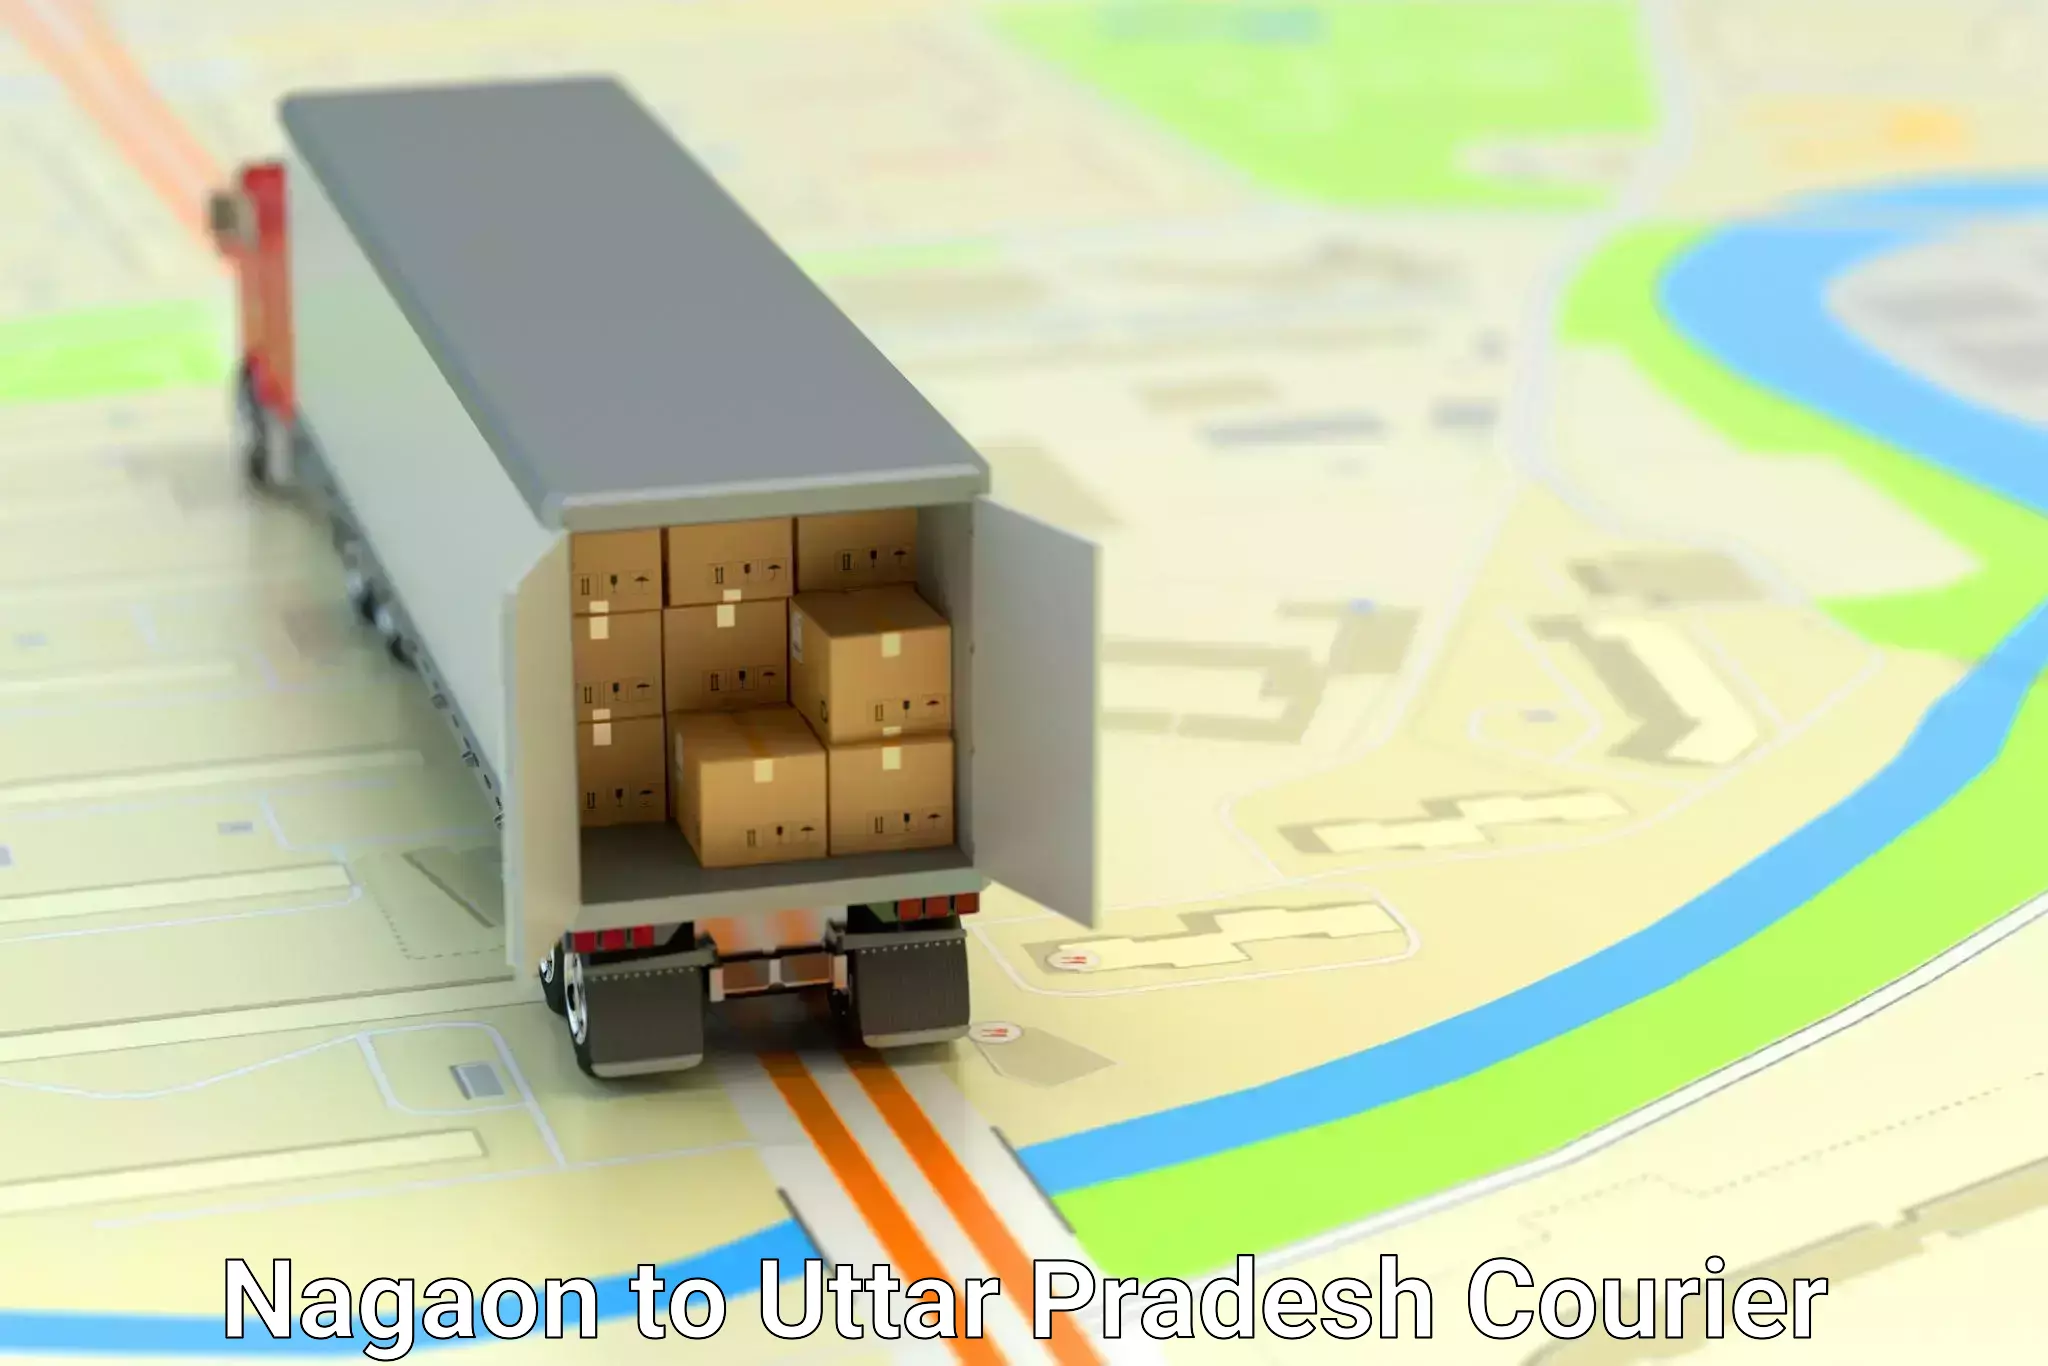 24/7 courier service Nagaon to Milak